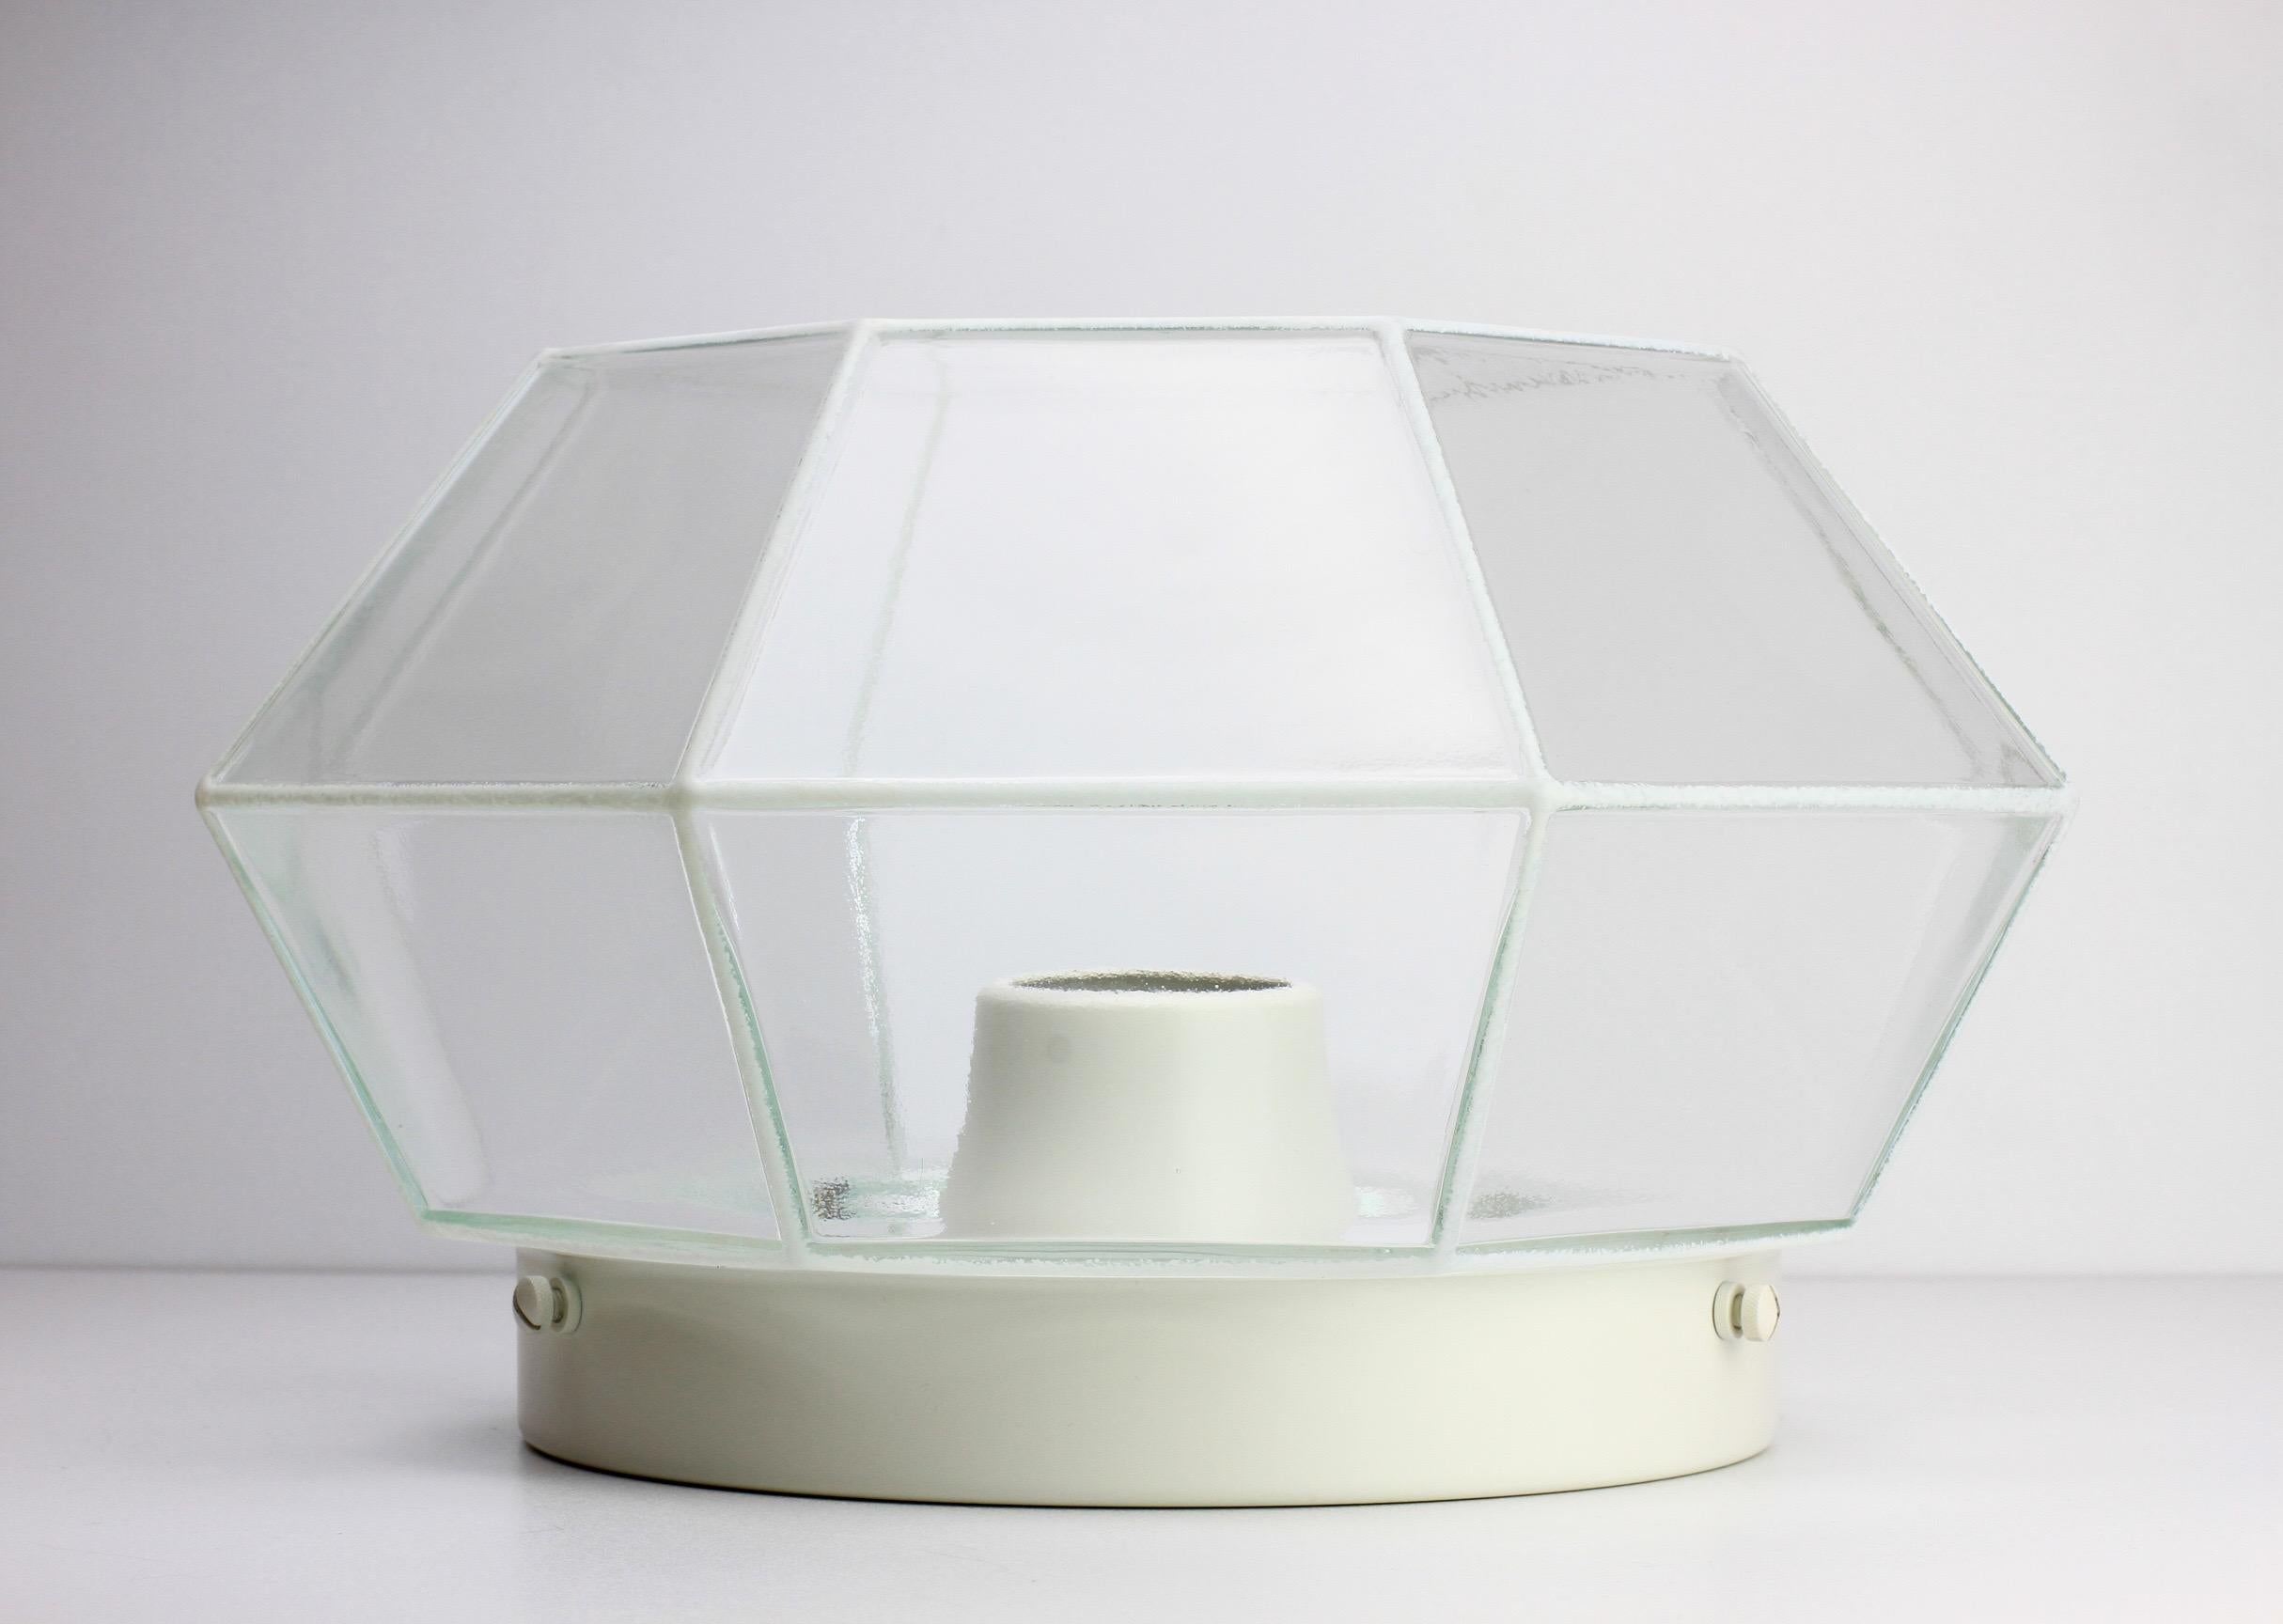 Metal Limburg 1 of 5 Geometric White & Clear Glass 1970s Flush Mount Lights Lamps For Sale